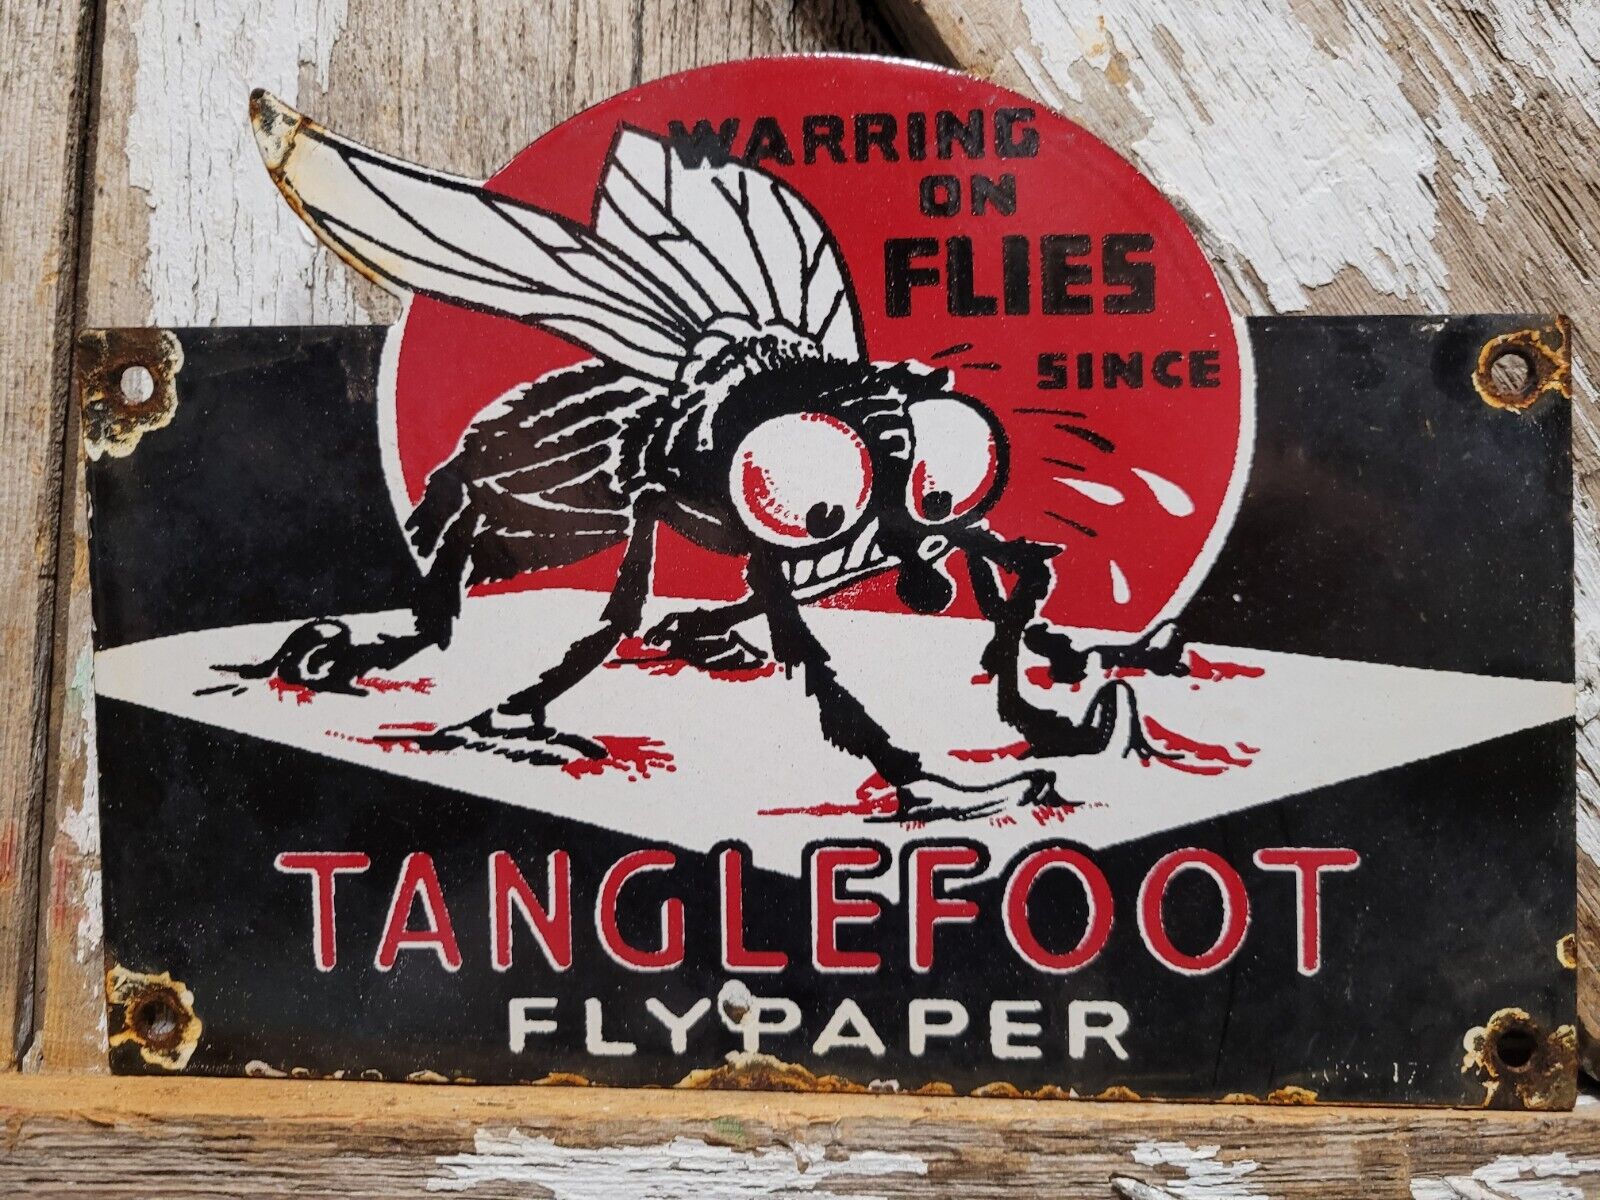 VINTAGE TANGLEFOOT PORCELAIN SIGN 1947 FLY PAPER BUG MOSQUITO REPPELENT SERVICE